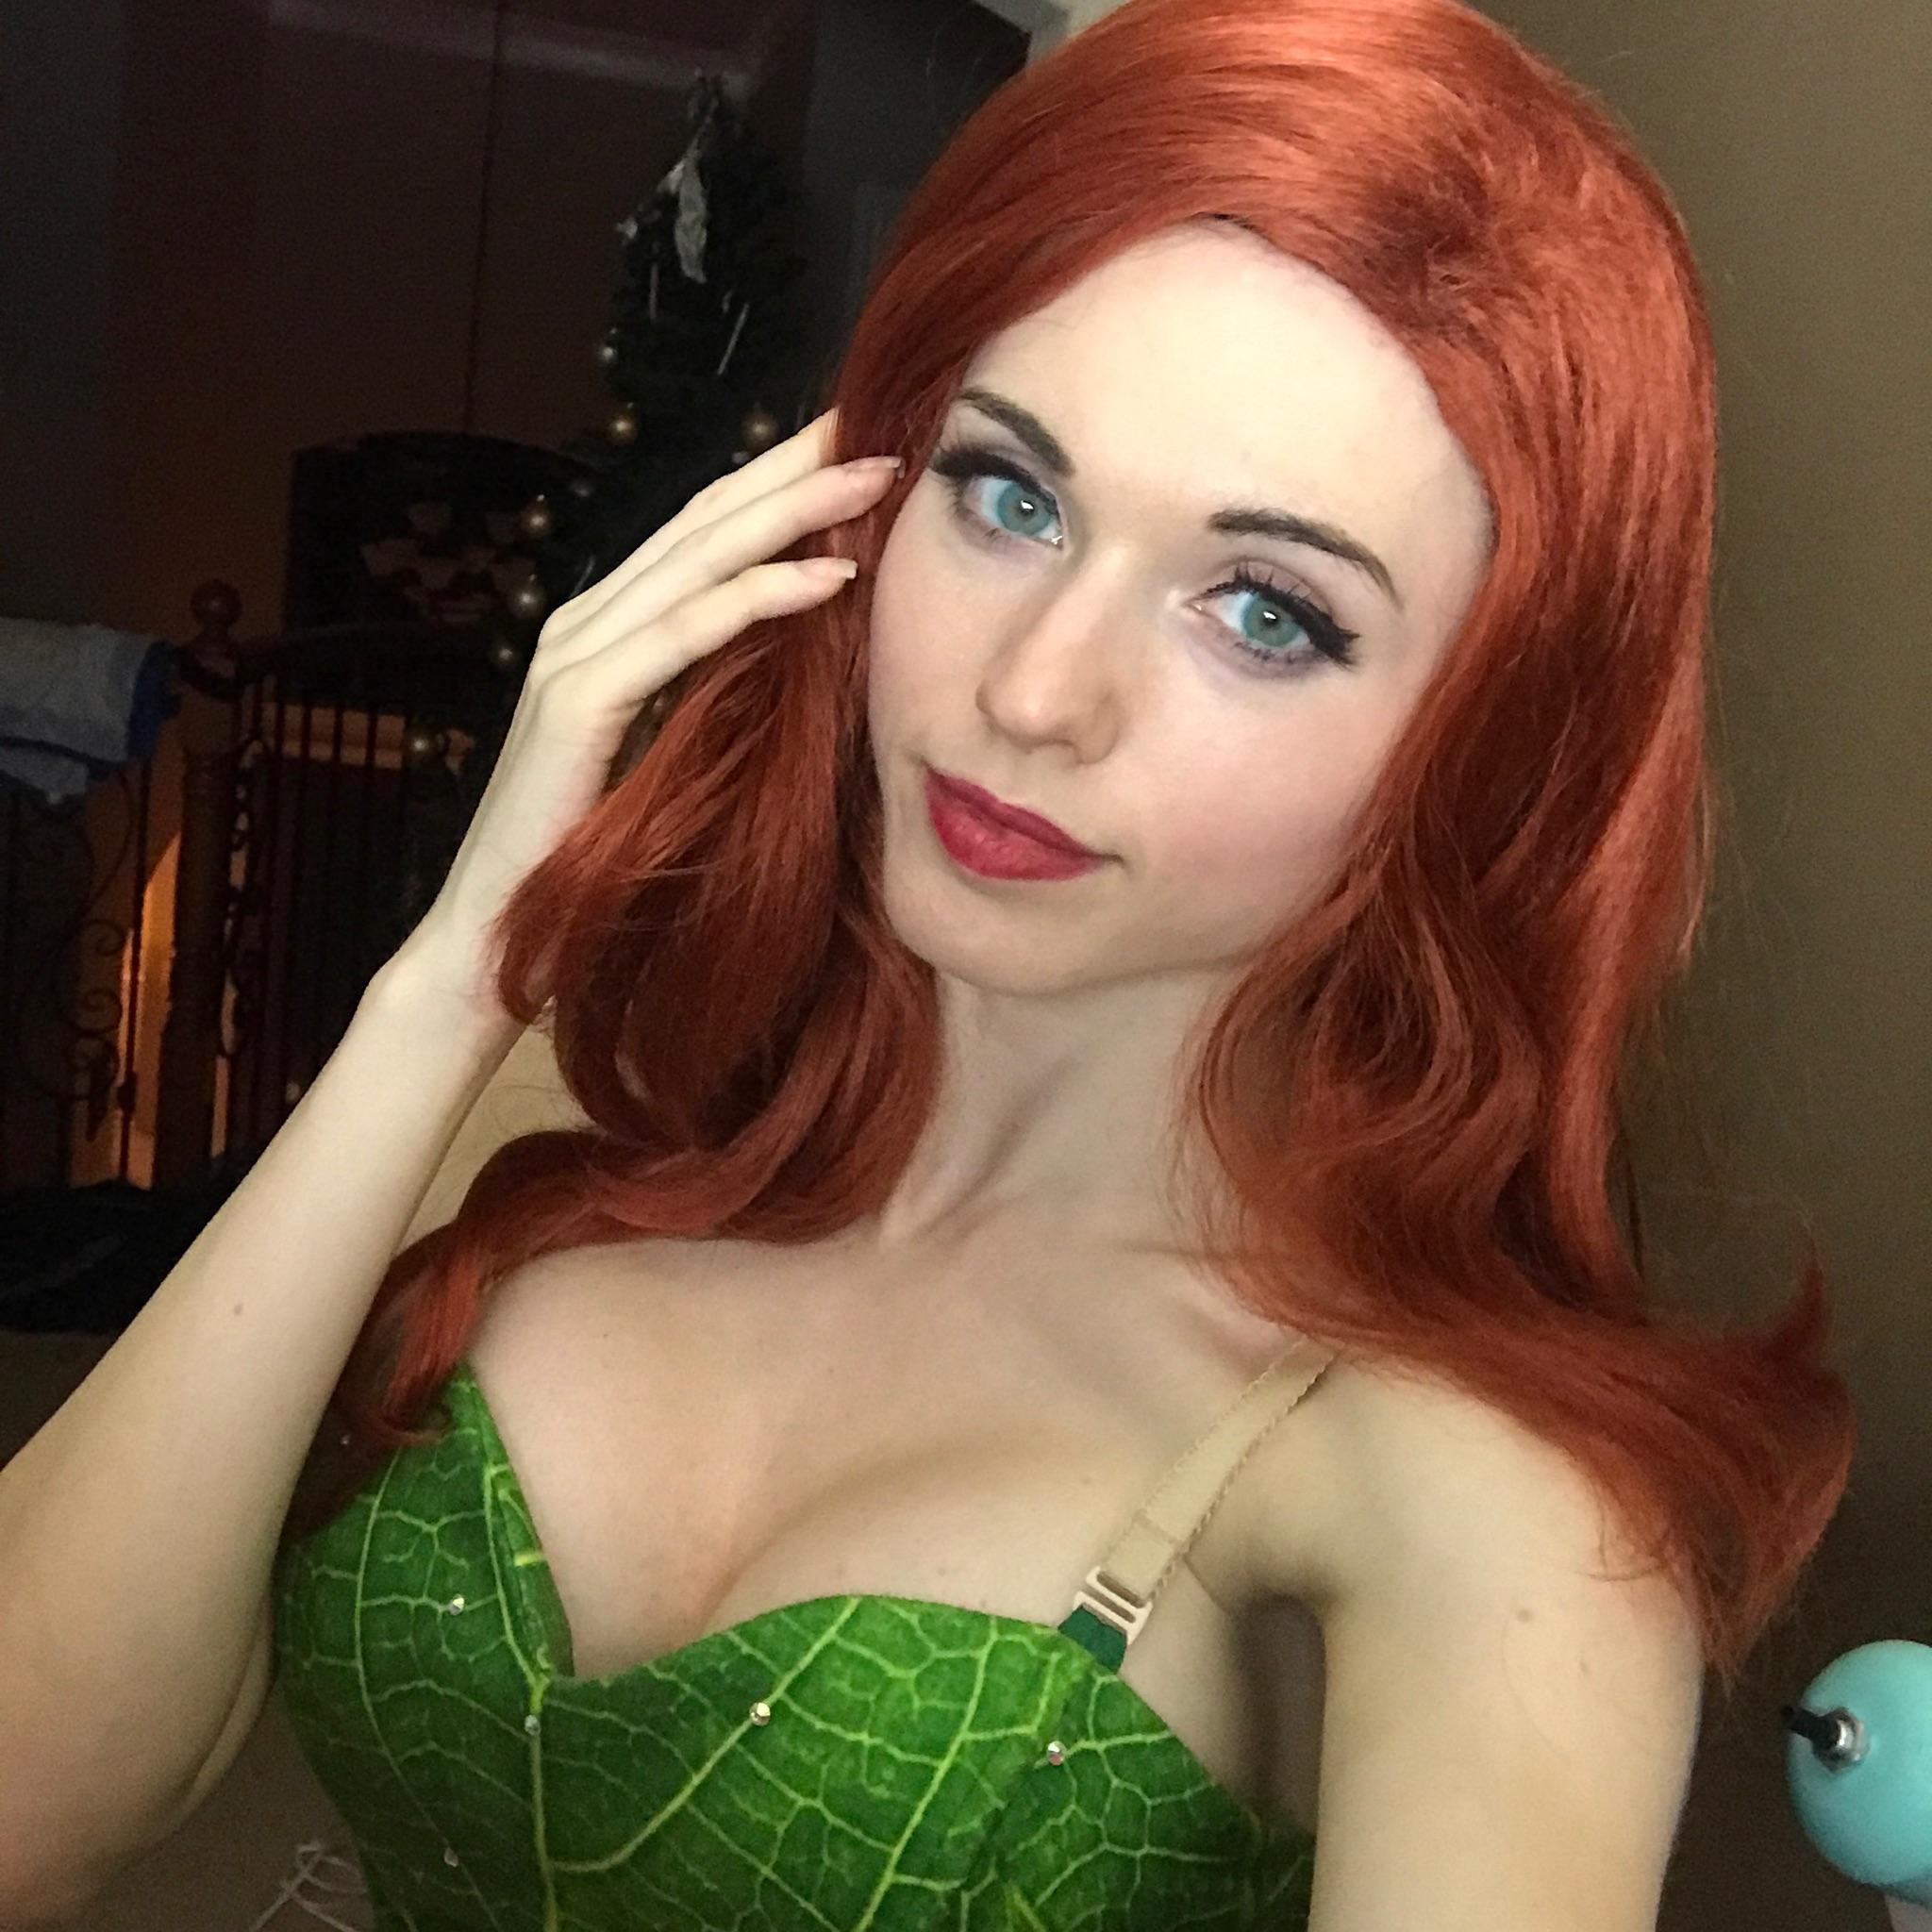 TwoGage on Twitter: "@Amouranth https://t.co/5i7r4gwvEV" / T